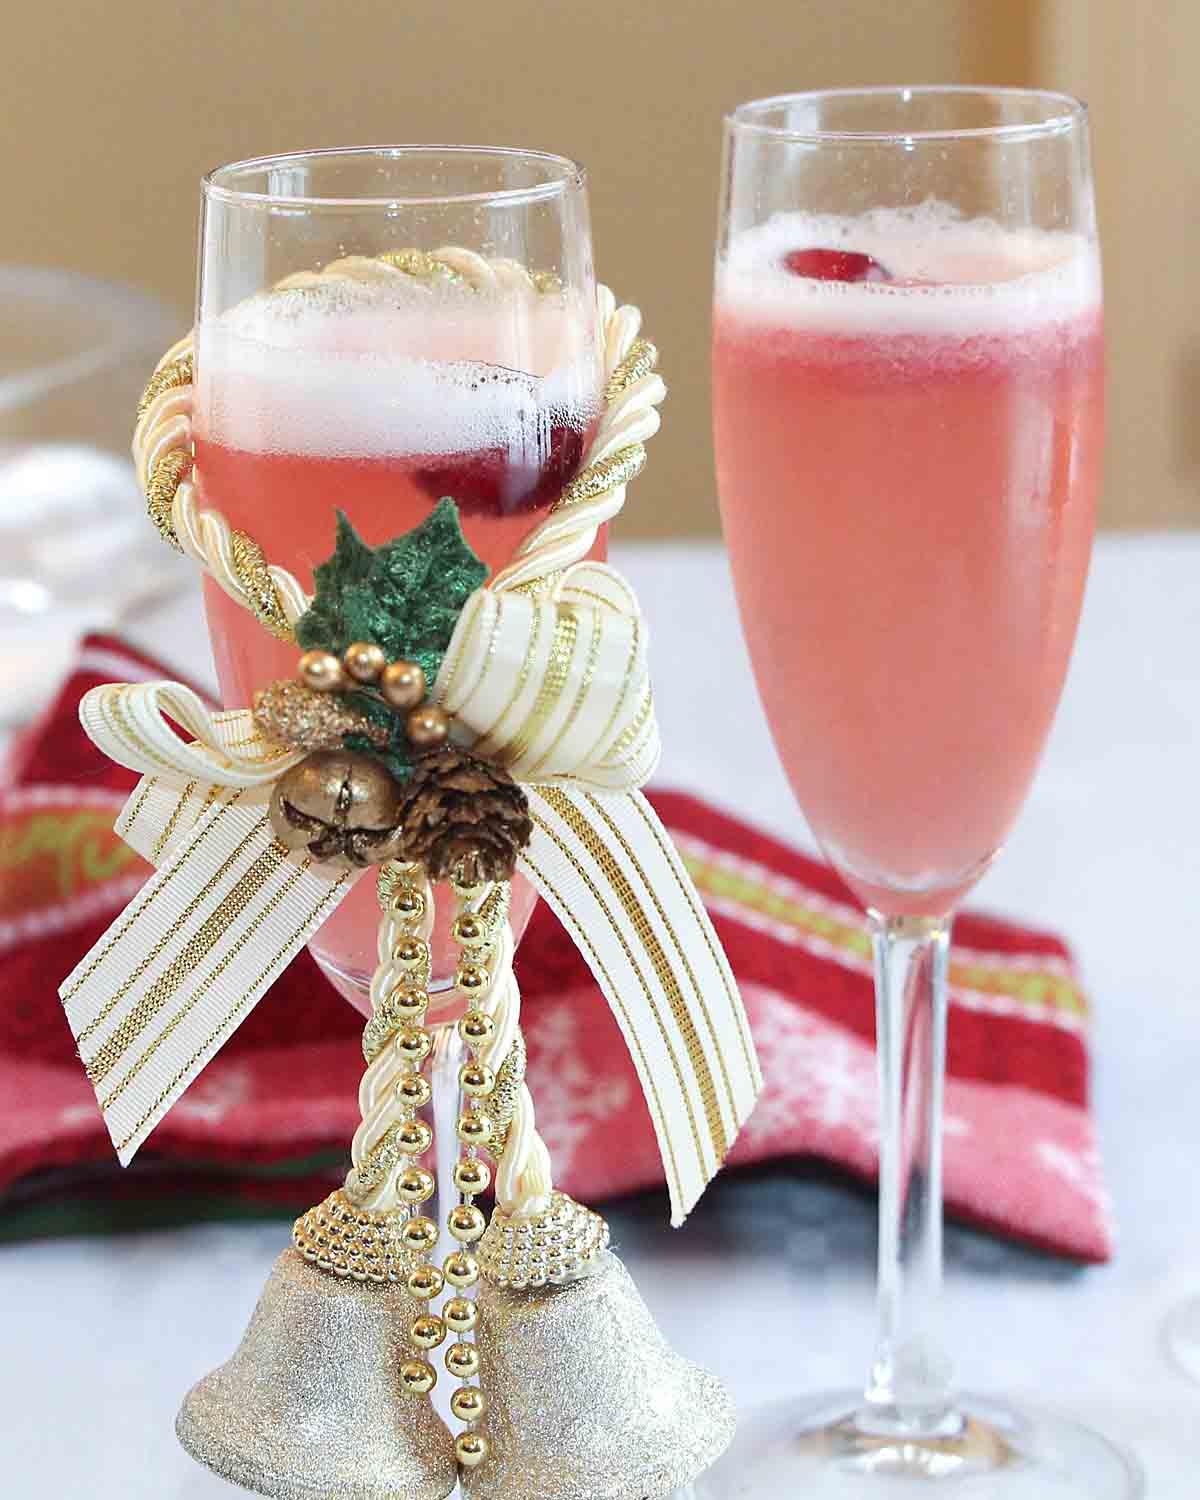 Sparkling Pomegranate Cocktail - A Pretty Life In The Suburbs